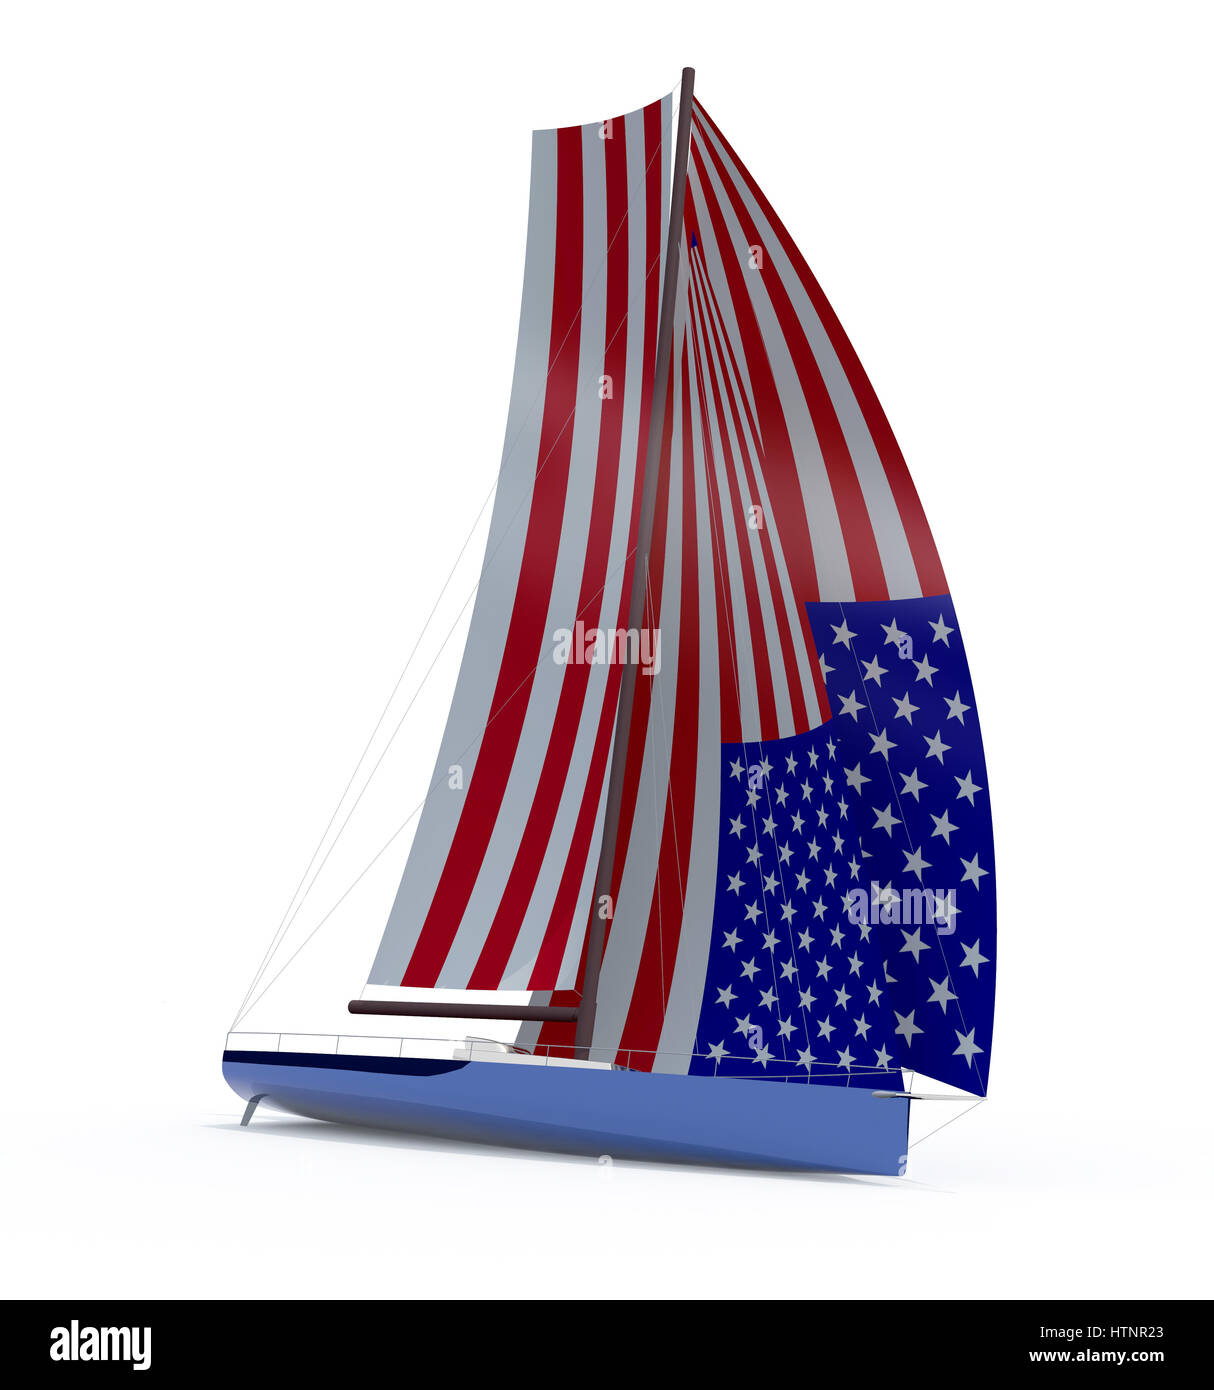 sailboat with sail colored as american flag, 3d illustration Stock Photo